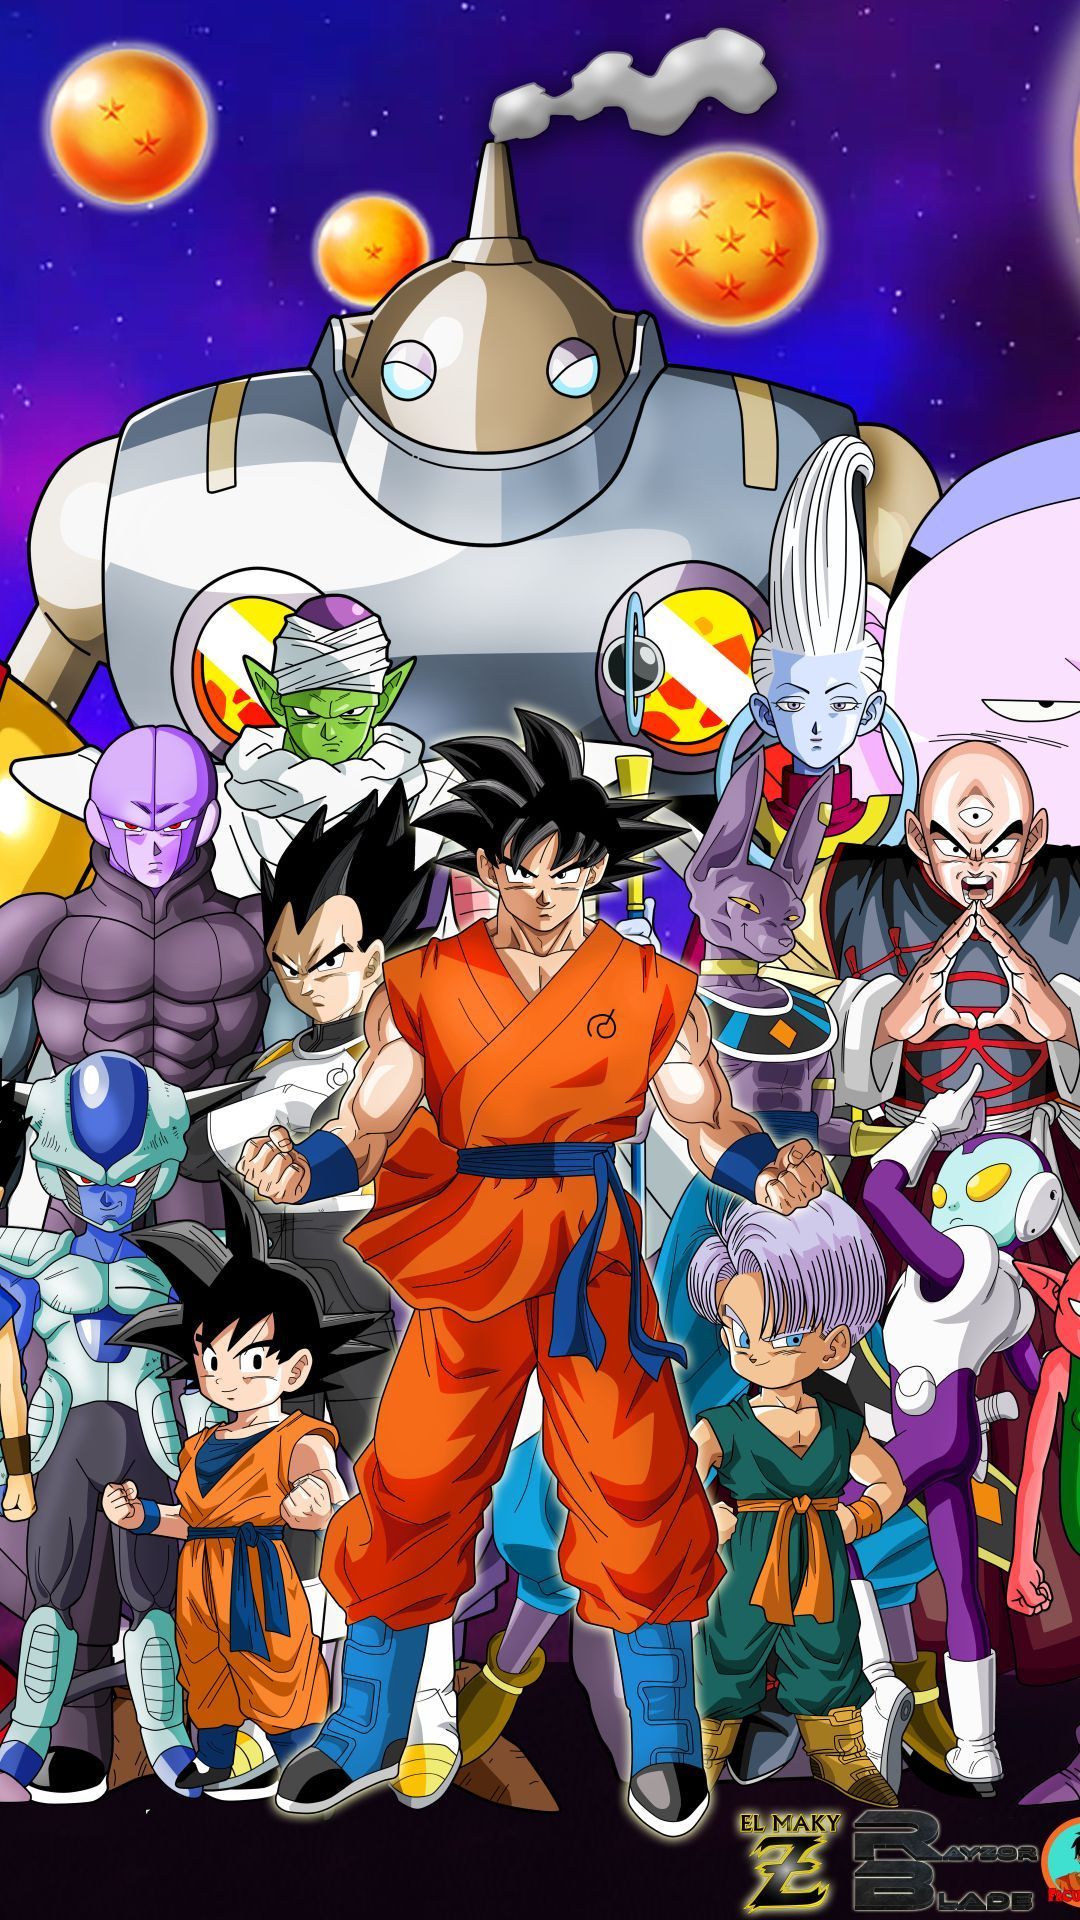 Dragon Ball Z Wallpapers Hd » Hupages » Download Iphone Wallpapers